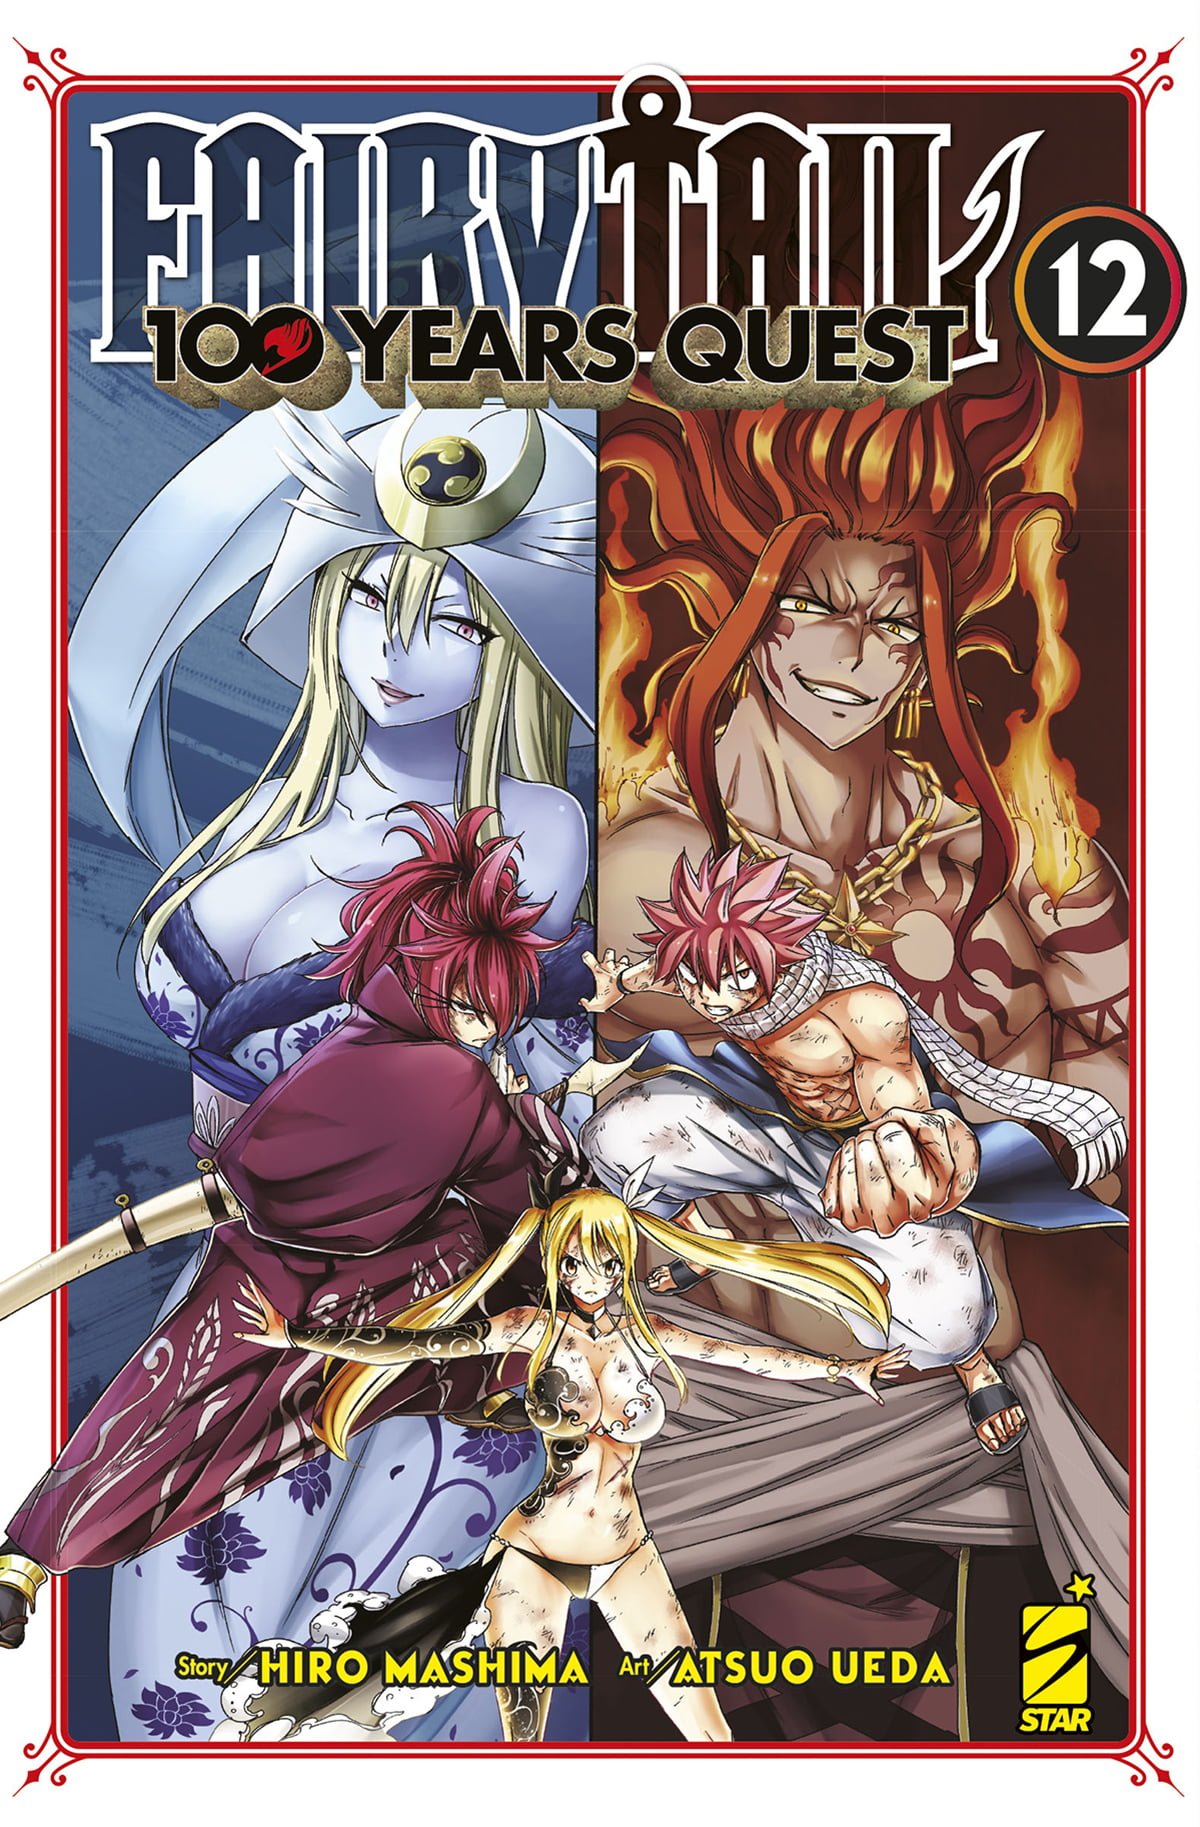 FAIRY TAIL 100 YEARS QUEST 12 YOUNG 342